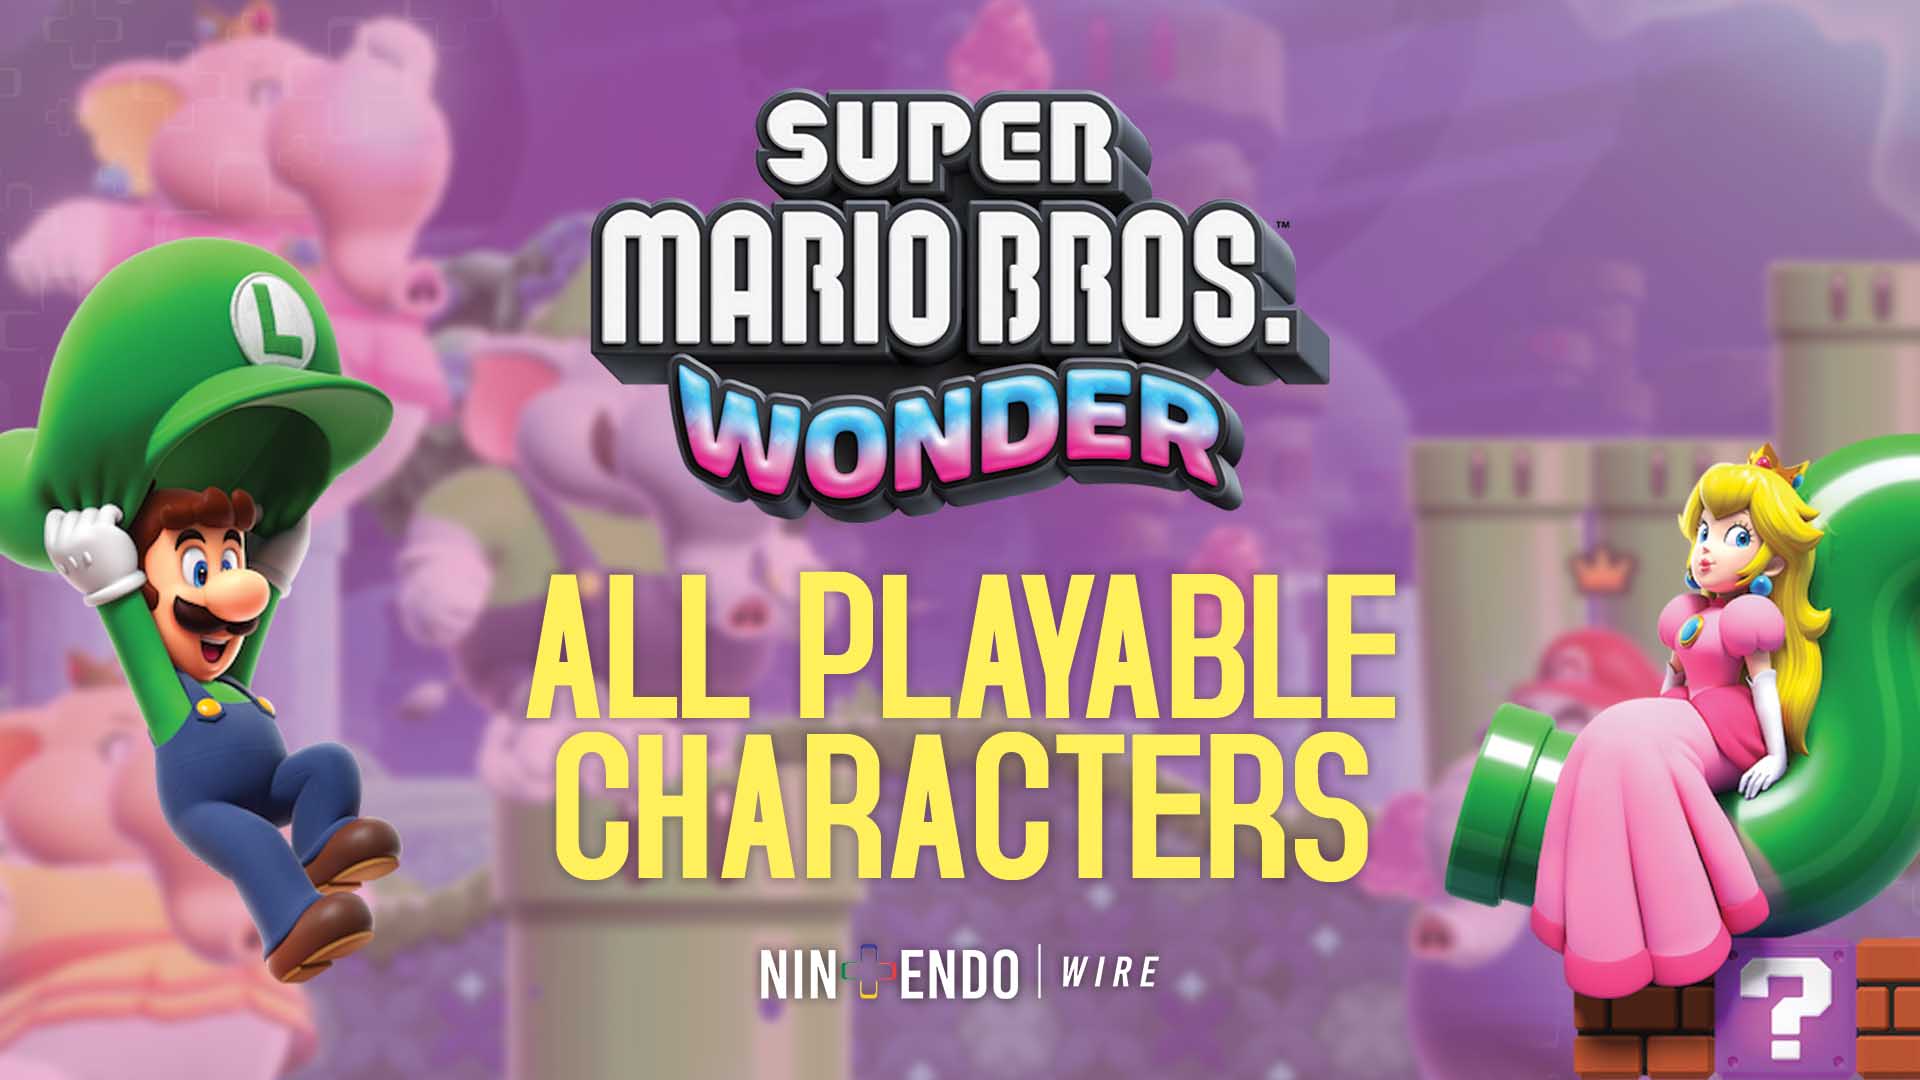 Guide - All playable characters in Super Mario Bros. Wonder